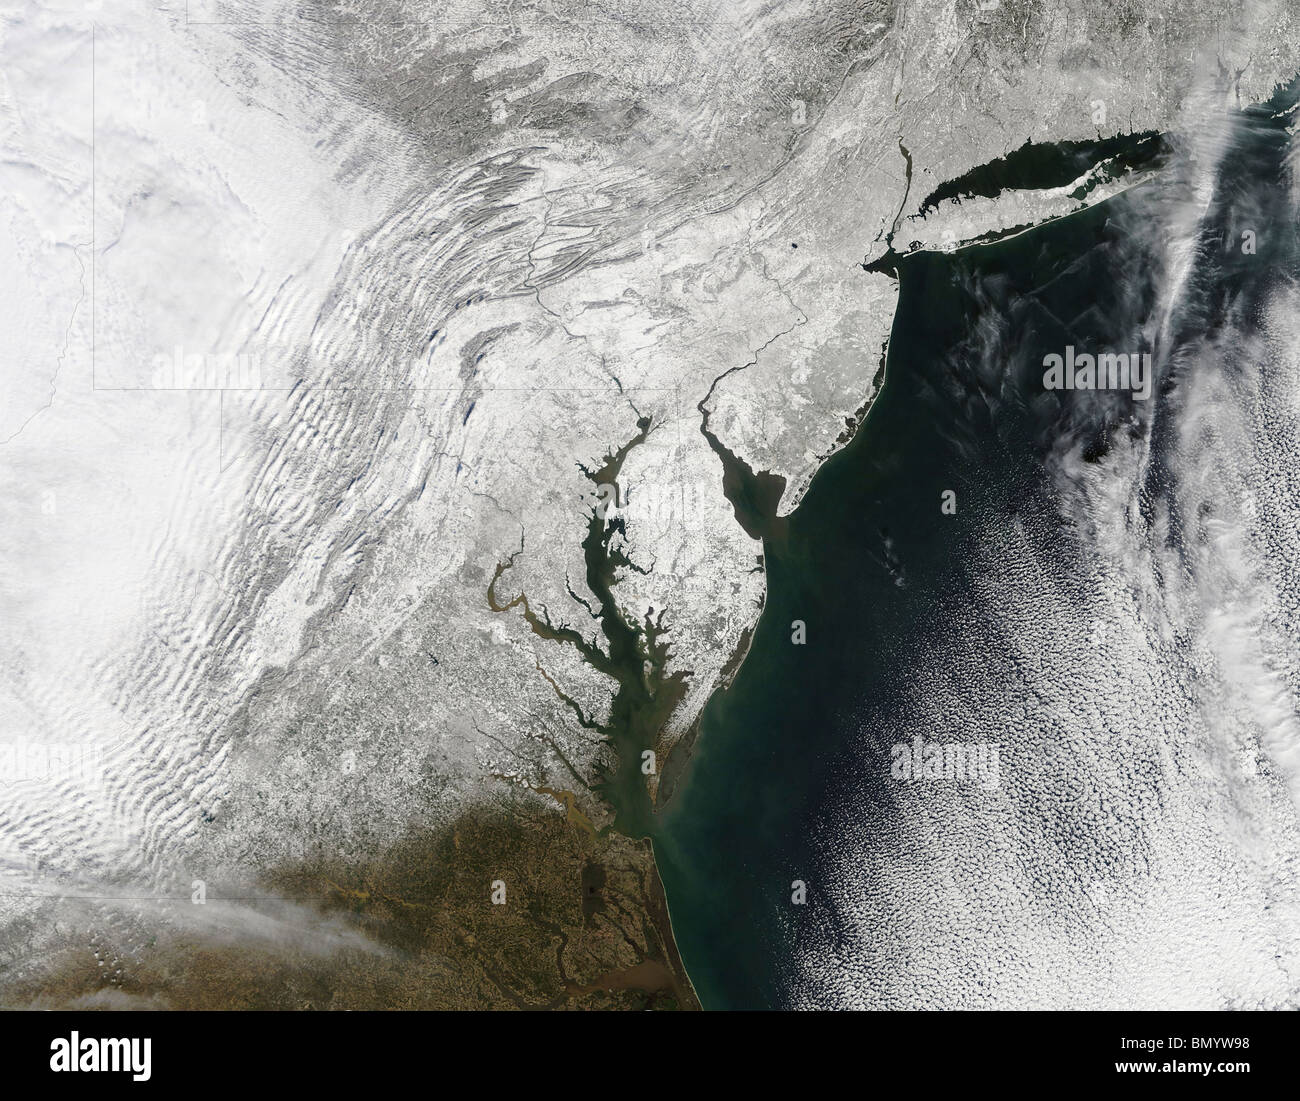 A severe winter storm along the United States east coast. Stock Photo